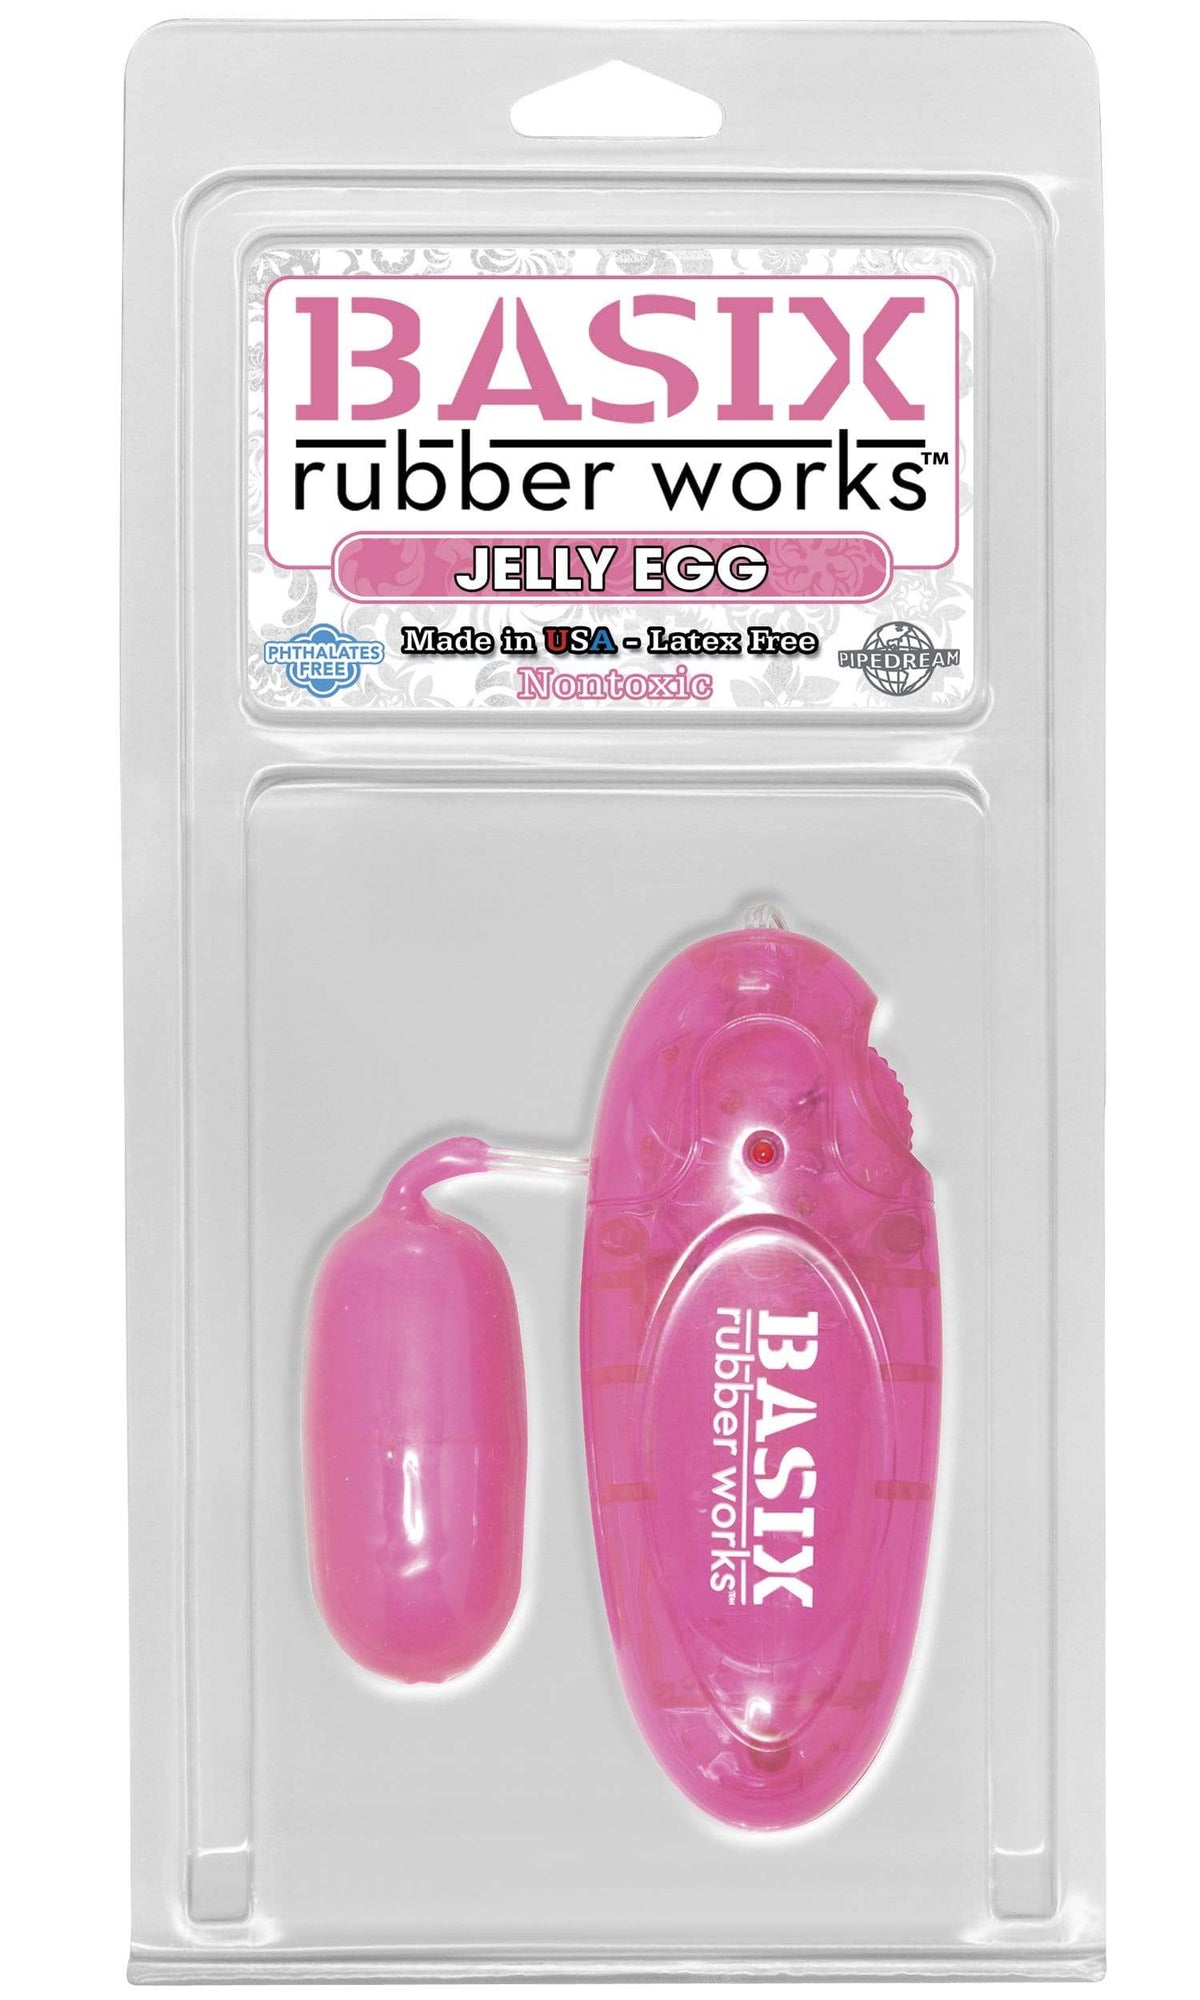 basix rubber works jelly egg pink